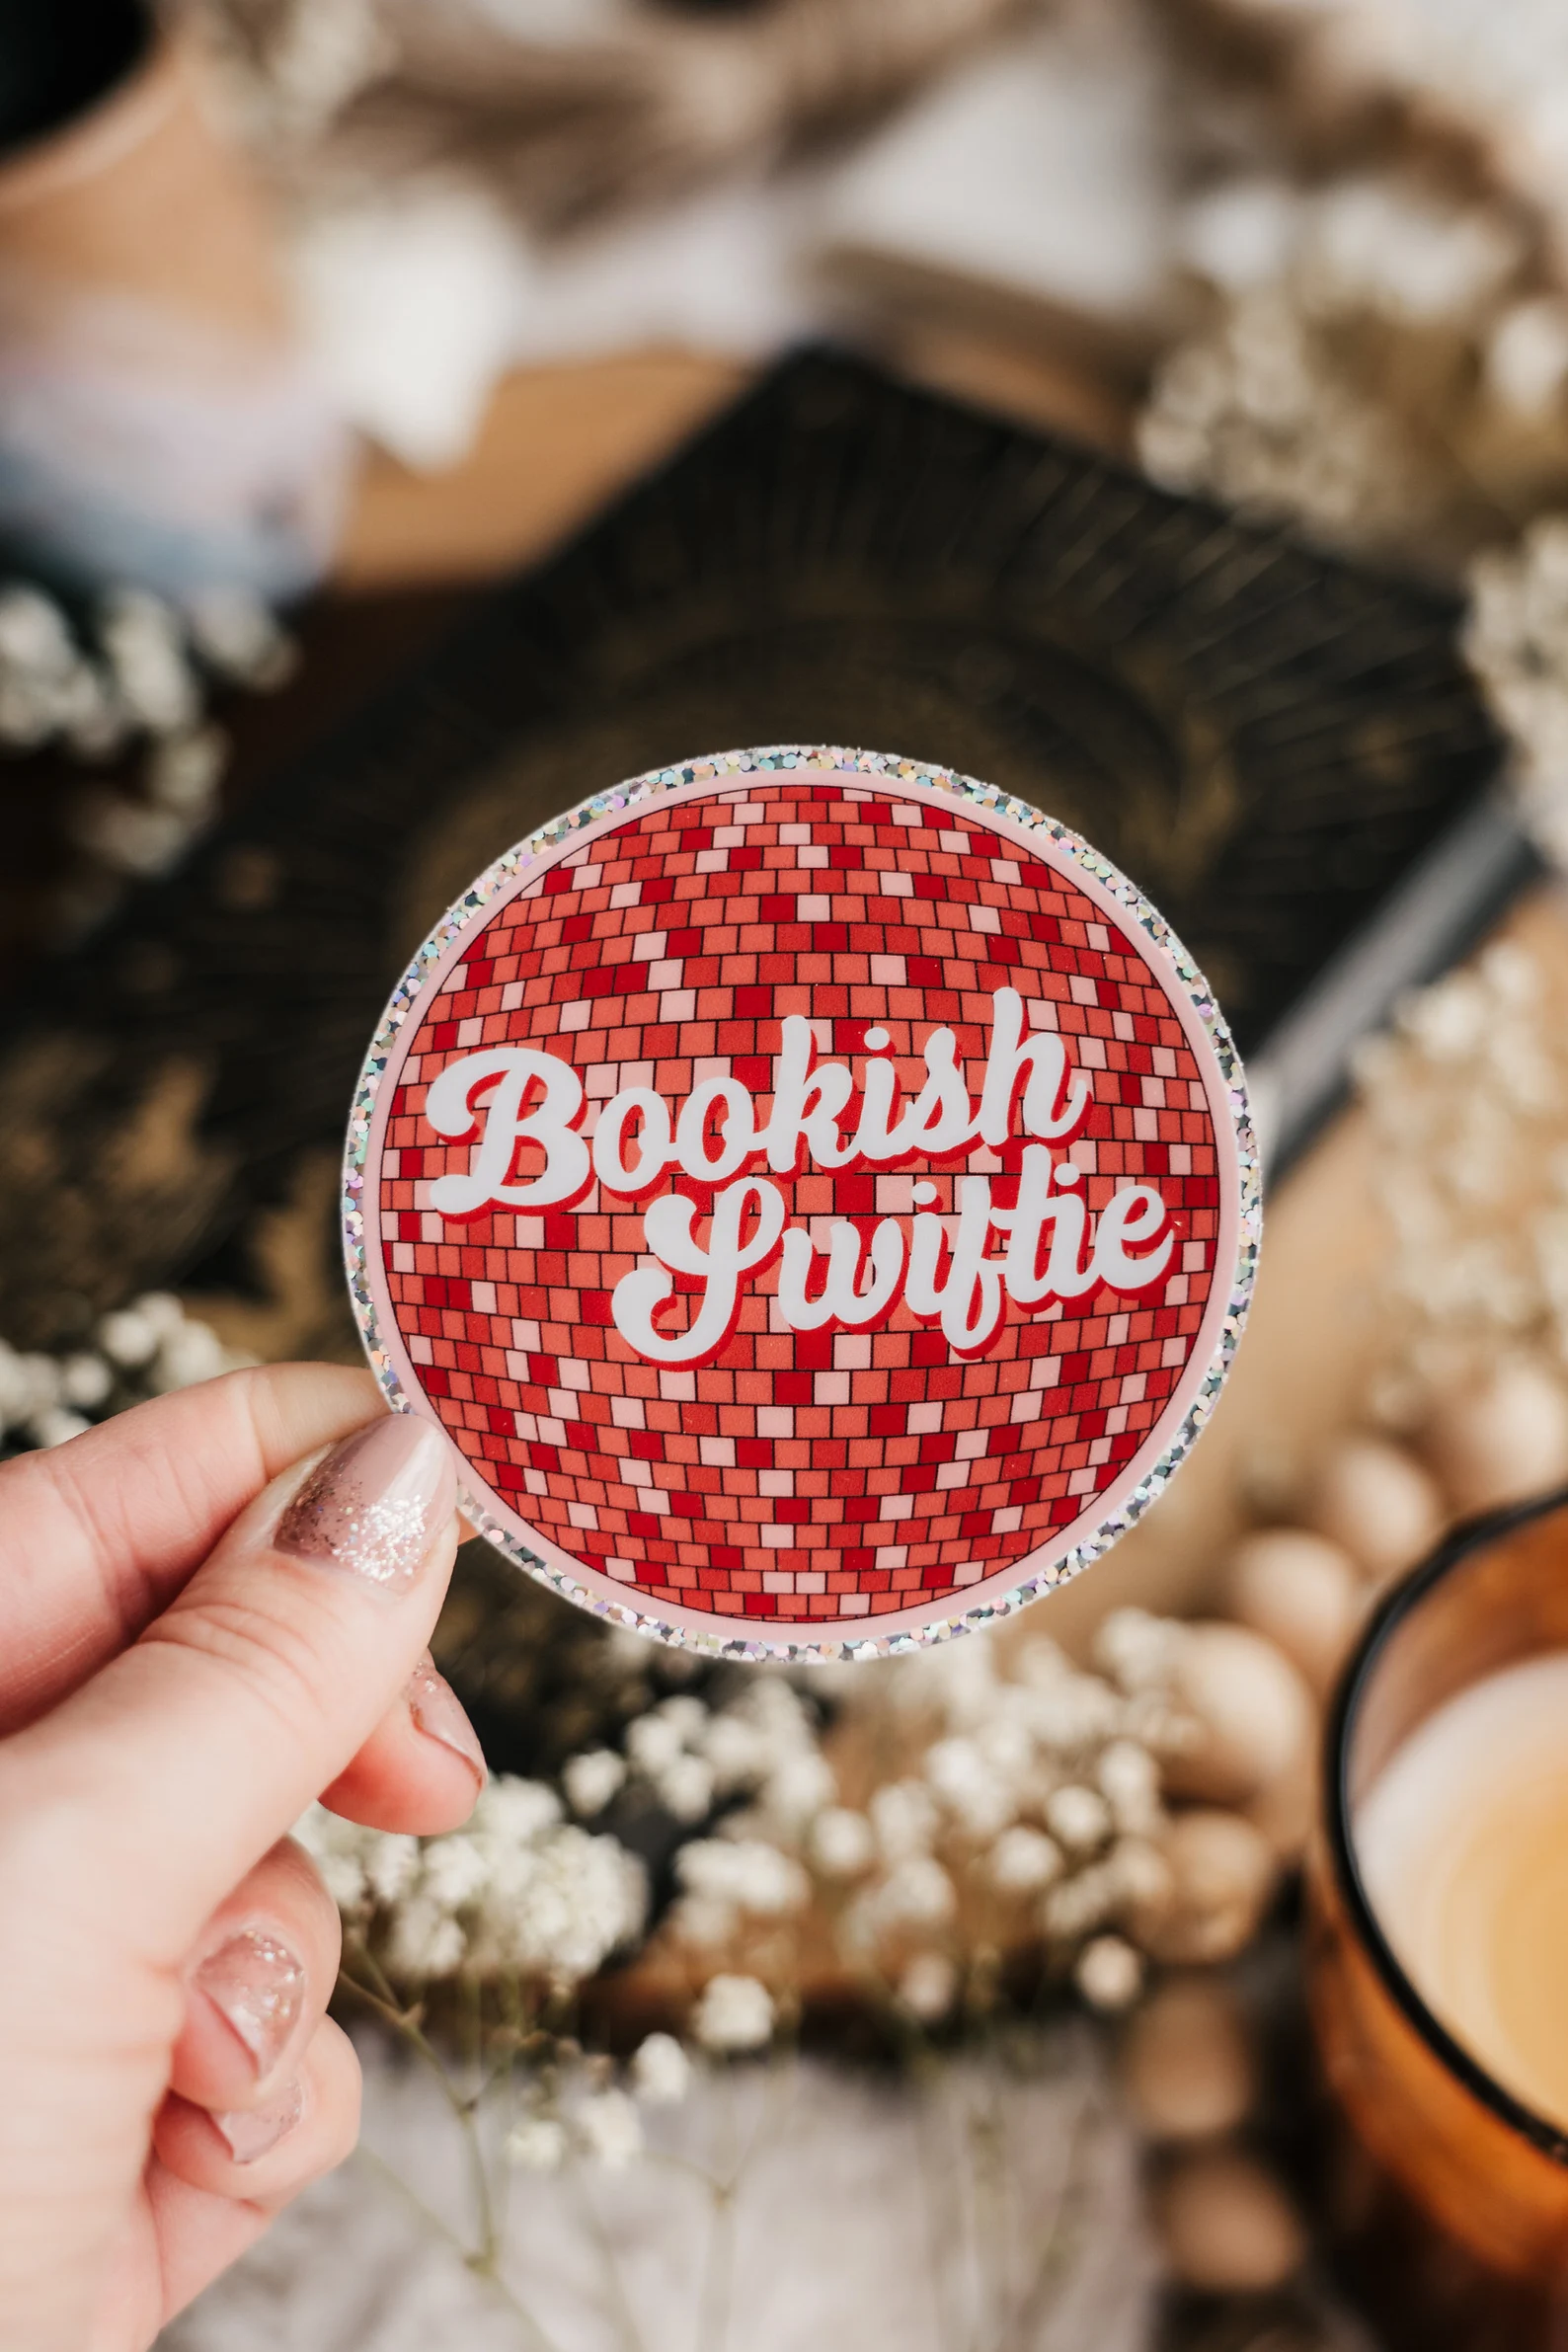 Image of a pink mirror ball sticker that says "bookish swiftie."